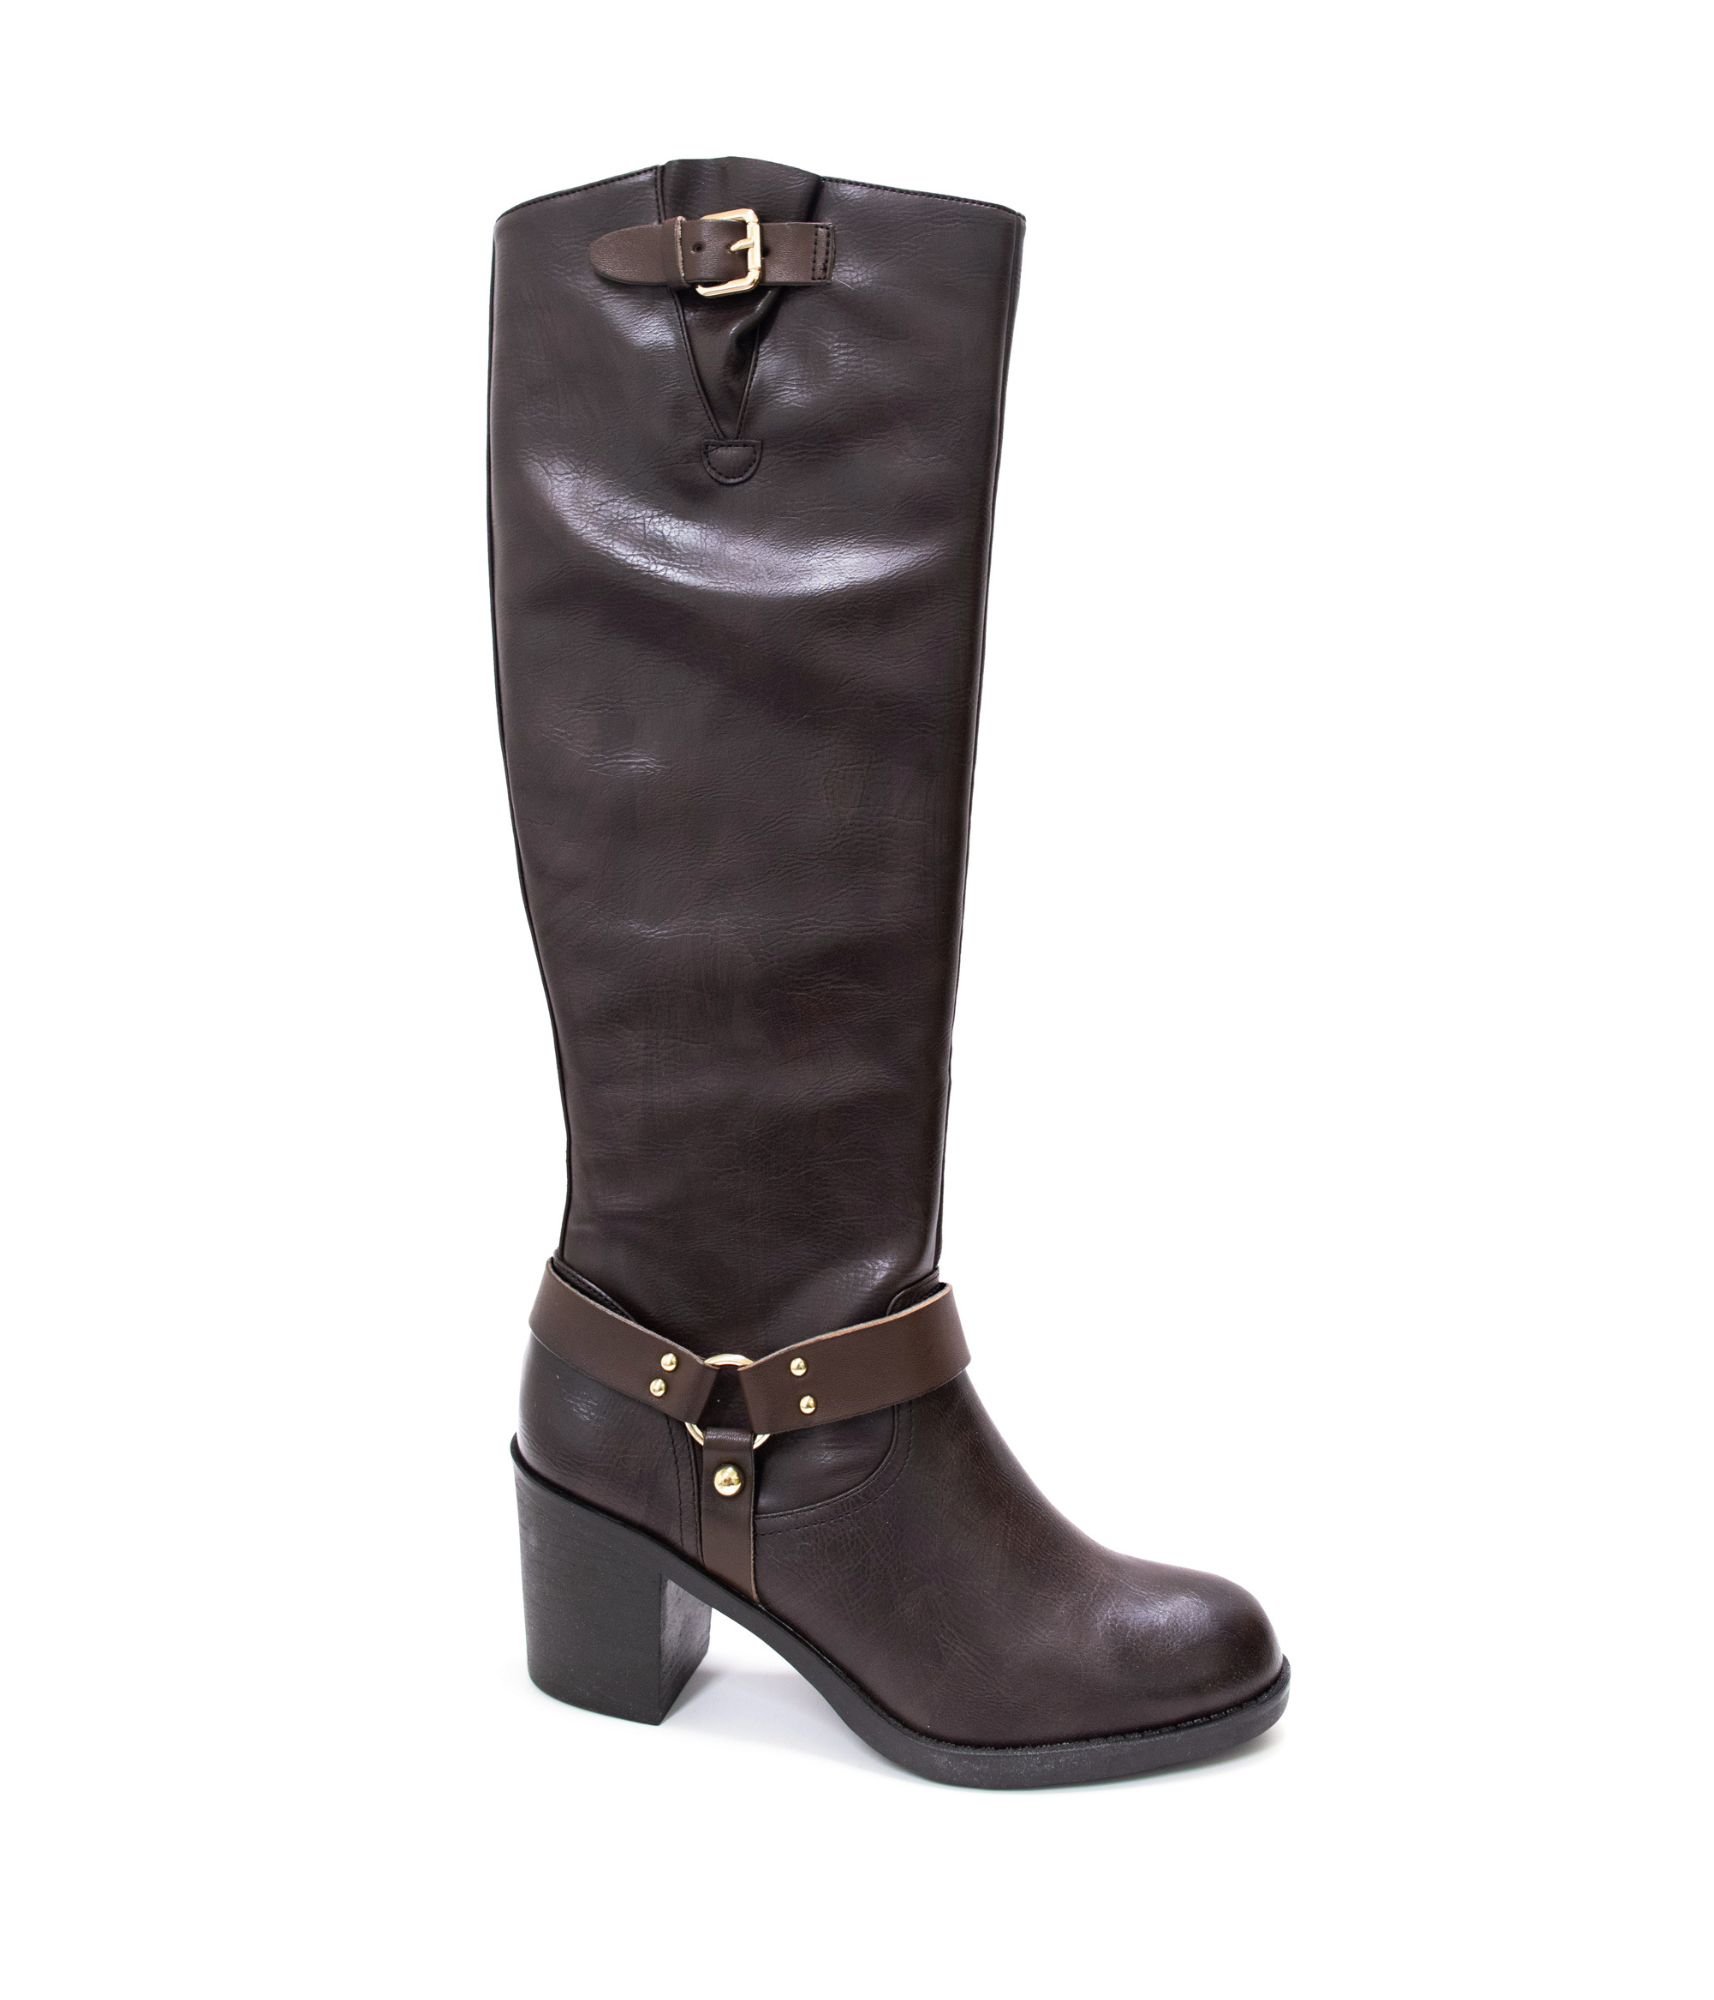 Barstow Knee High Boots